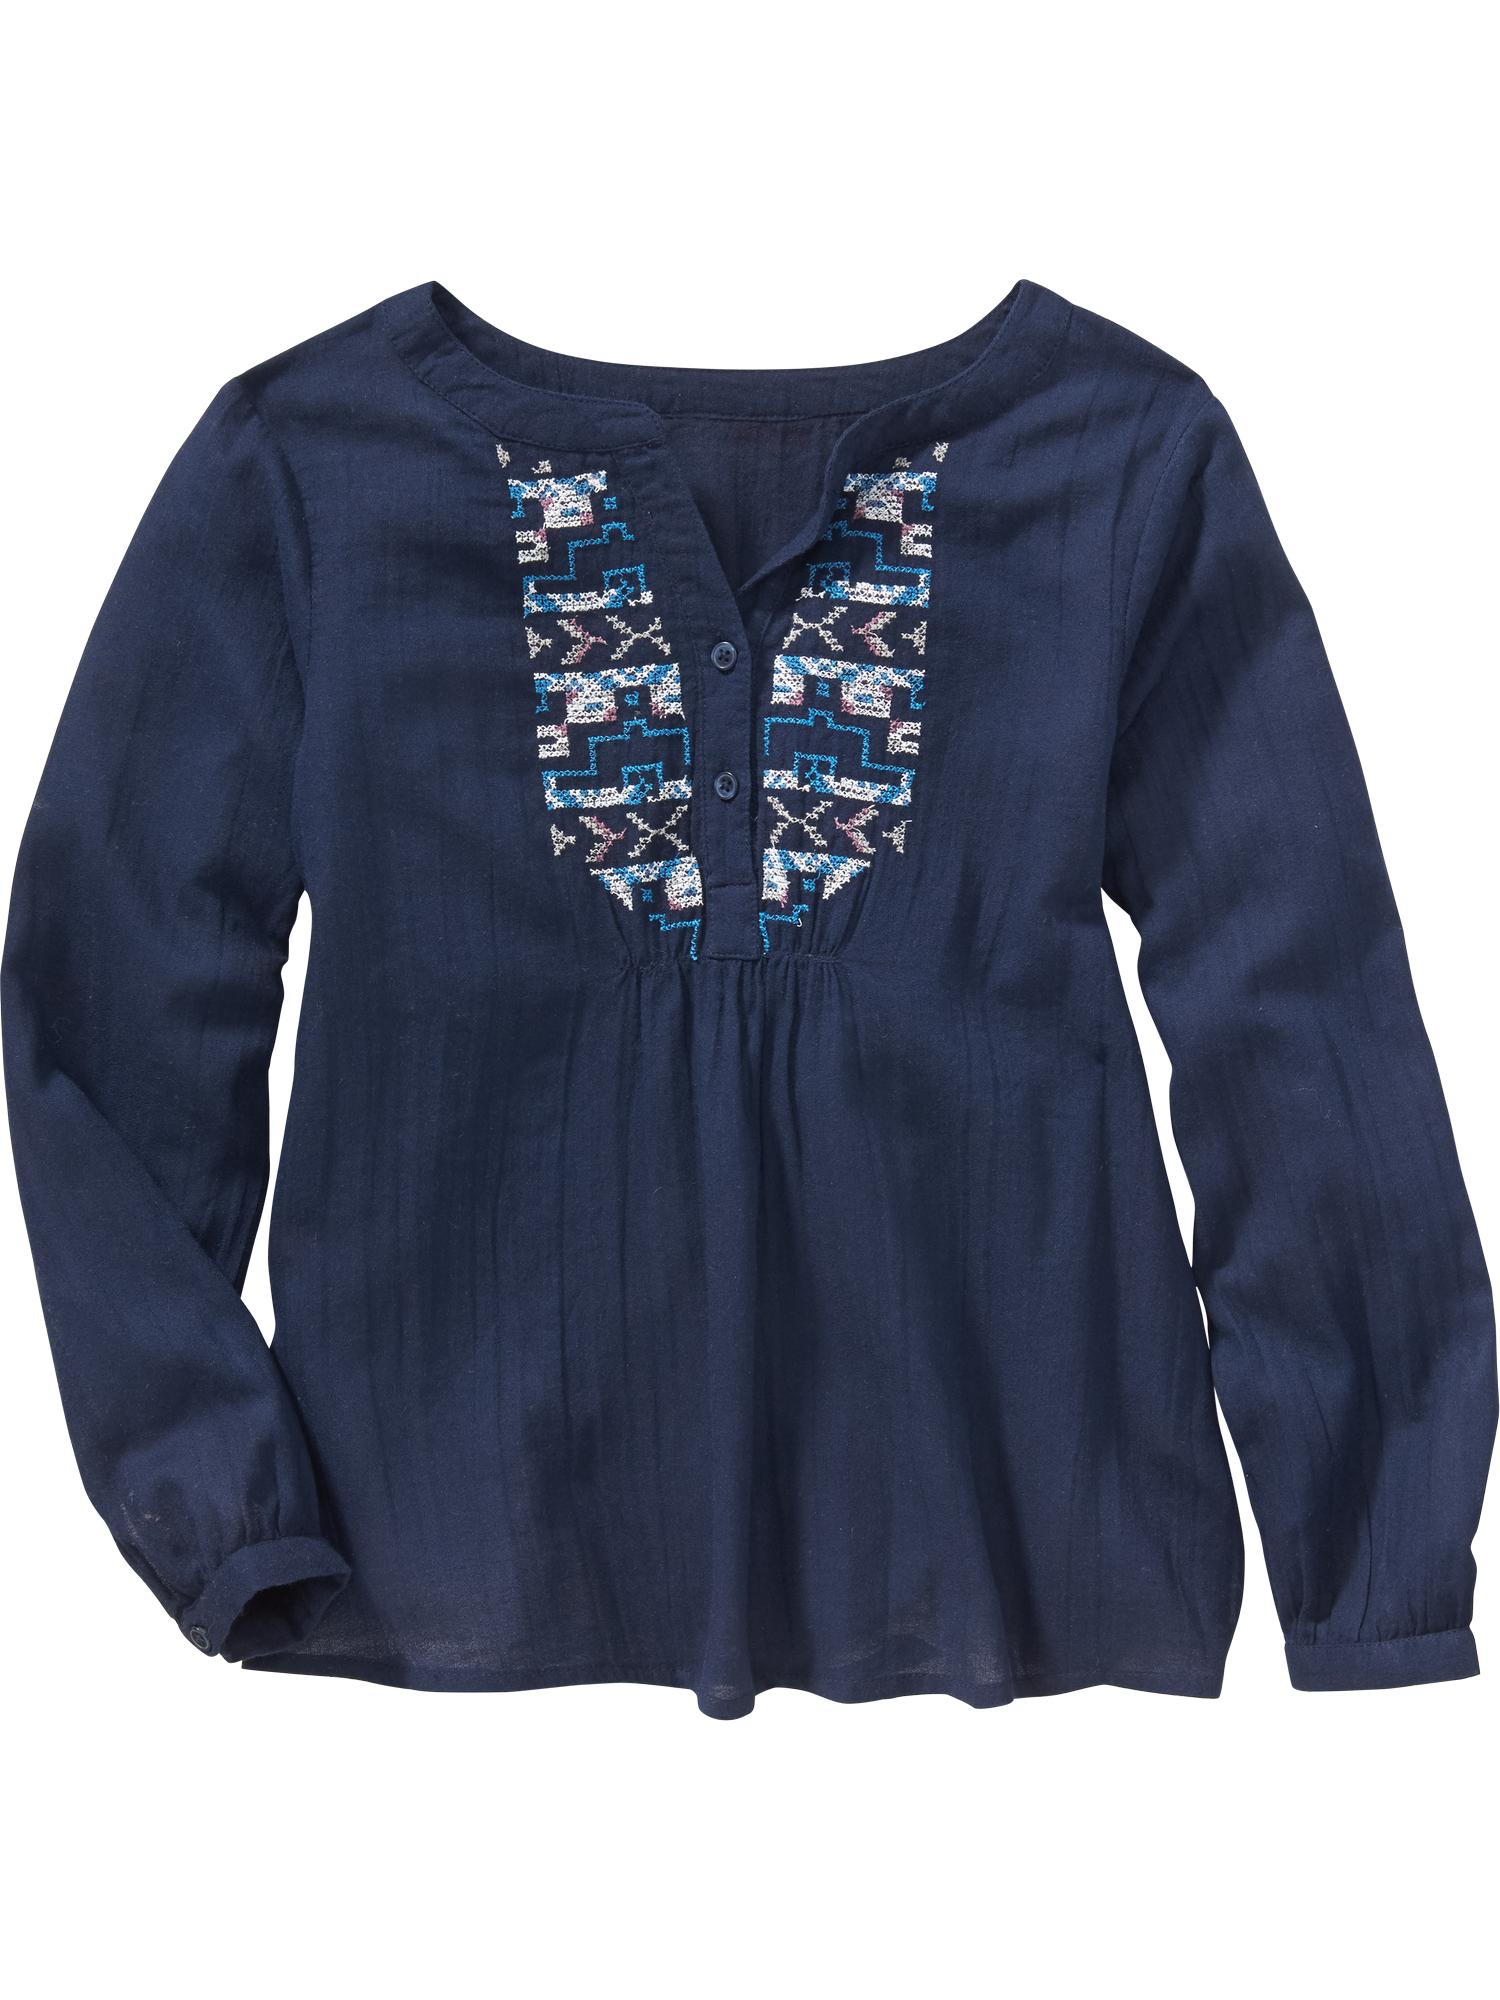 Girls Embroidered Boho Top | Old Navy